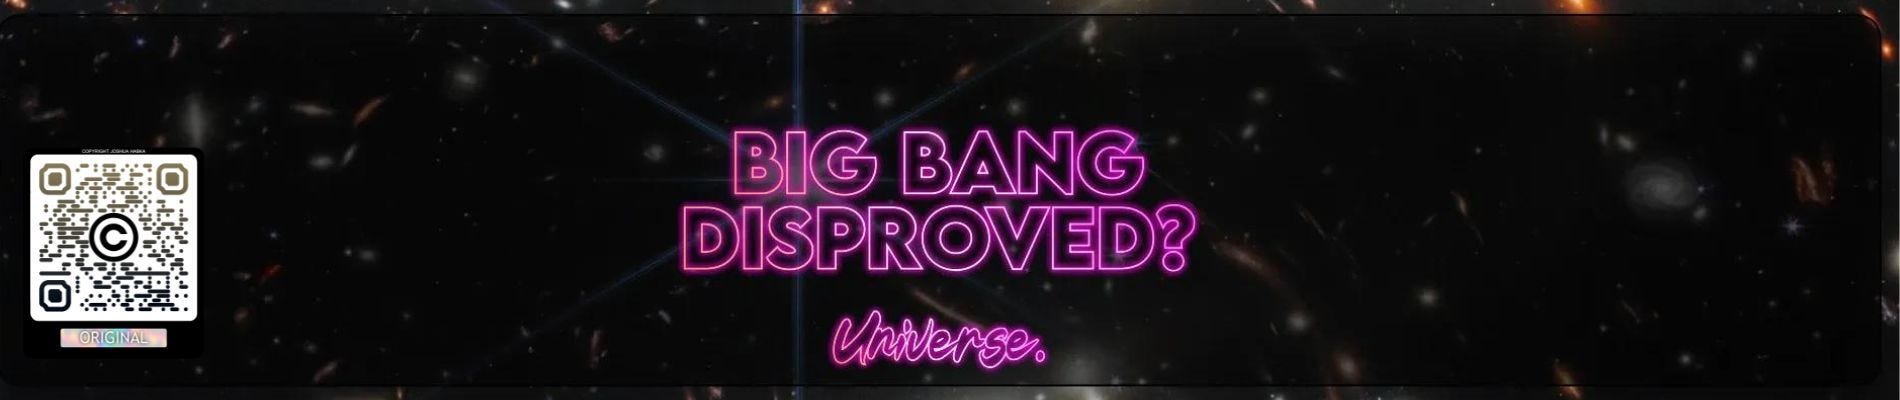 Did The James Webb Space Telescope Disprove The Big Bang Theory-?—?Jos